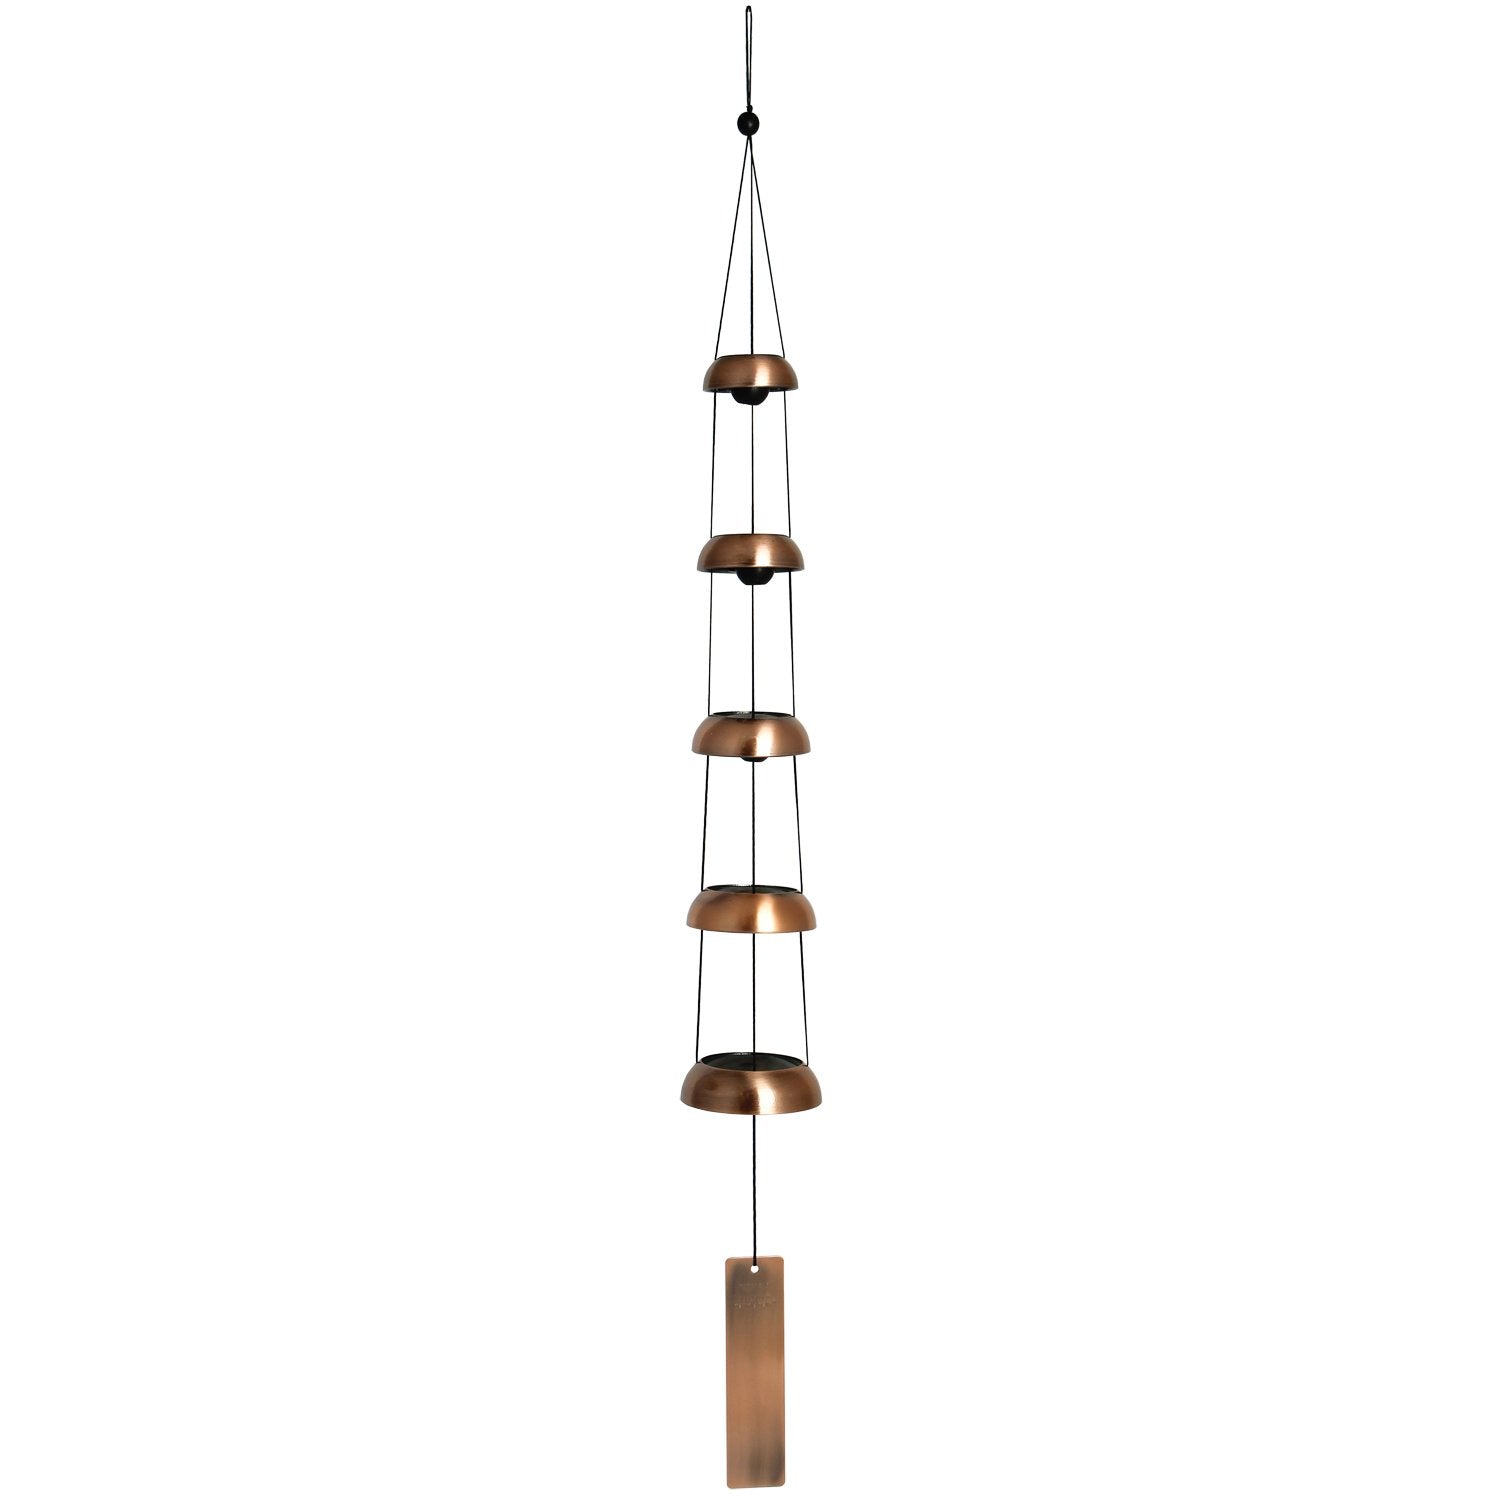 Outdoor Indoor 28 Metal Tube Wind Chime with Copper Bell Large Windchimes  for Patio Garden Terrace W Fengshuisale Red String Bracelet W3089